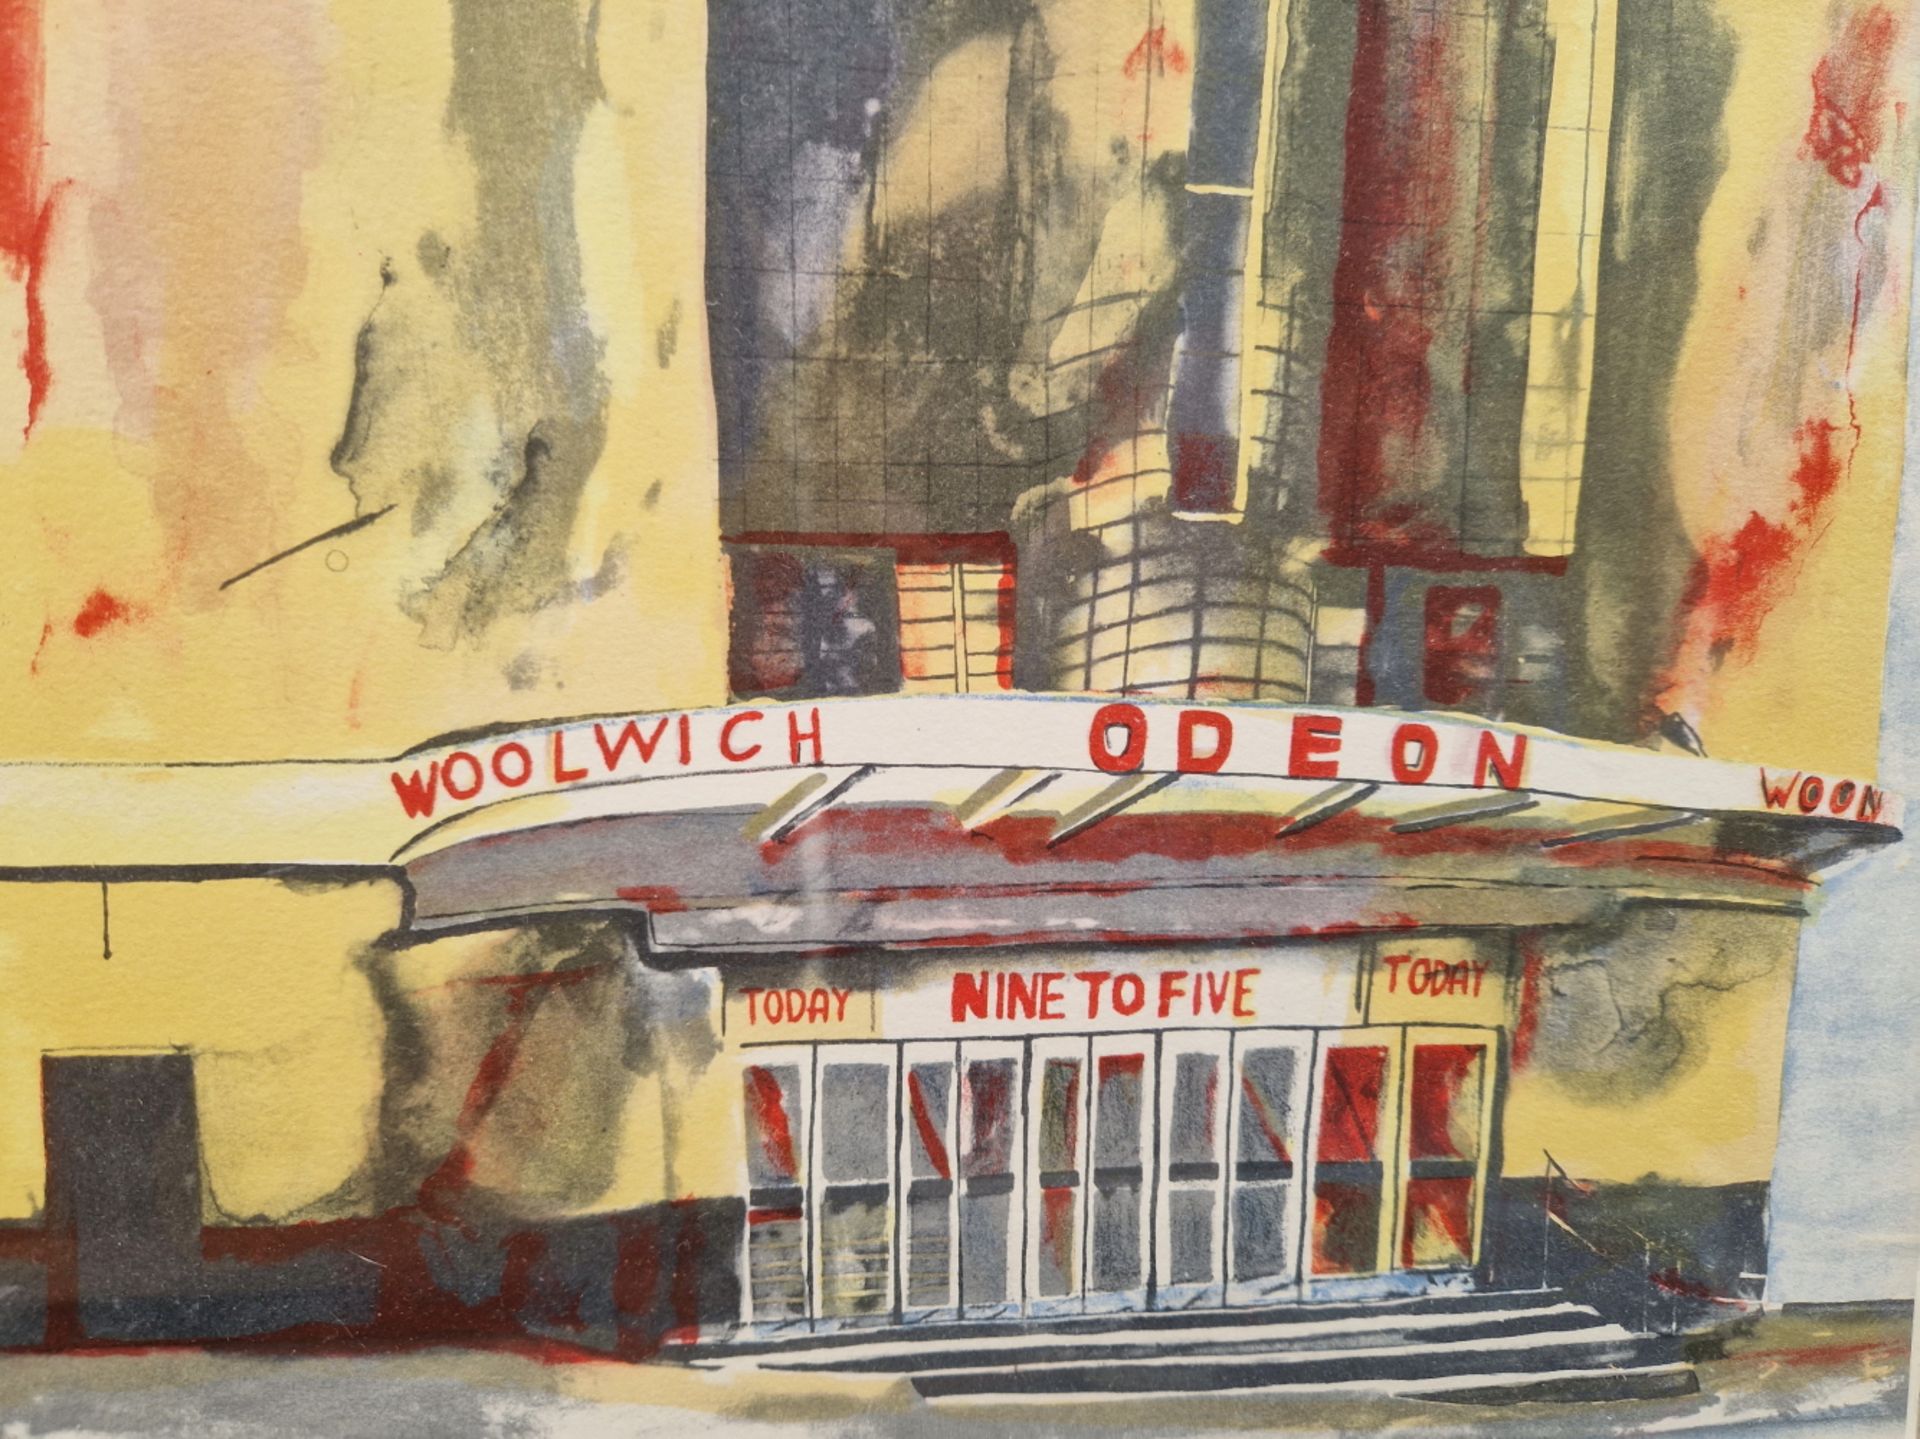 CHRISTOPHER CORR ) 1955 - ) ARR. WOOLWICH ODEON PENCIL SIGNED LIMITED EDITION COLOUR PRINT 53 x - Image 4 of 10